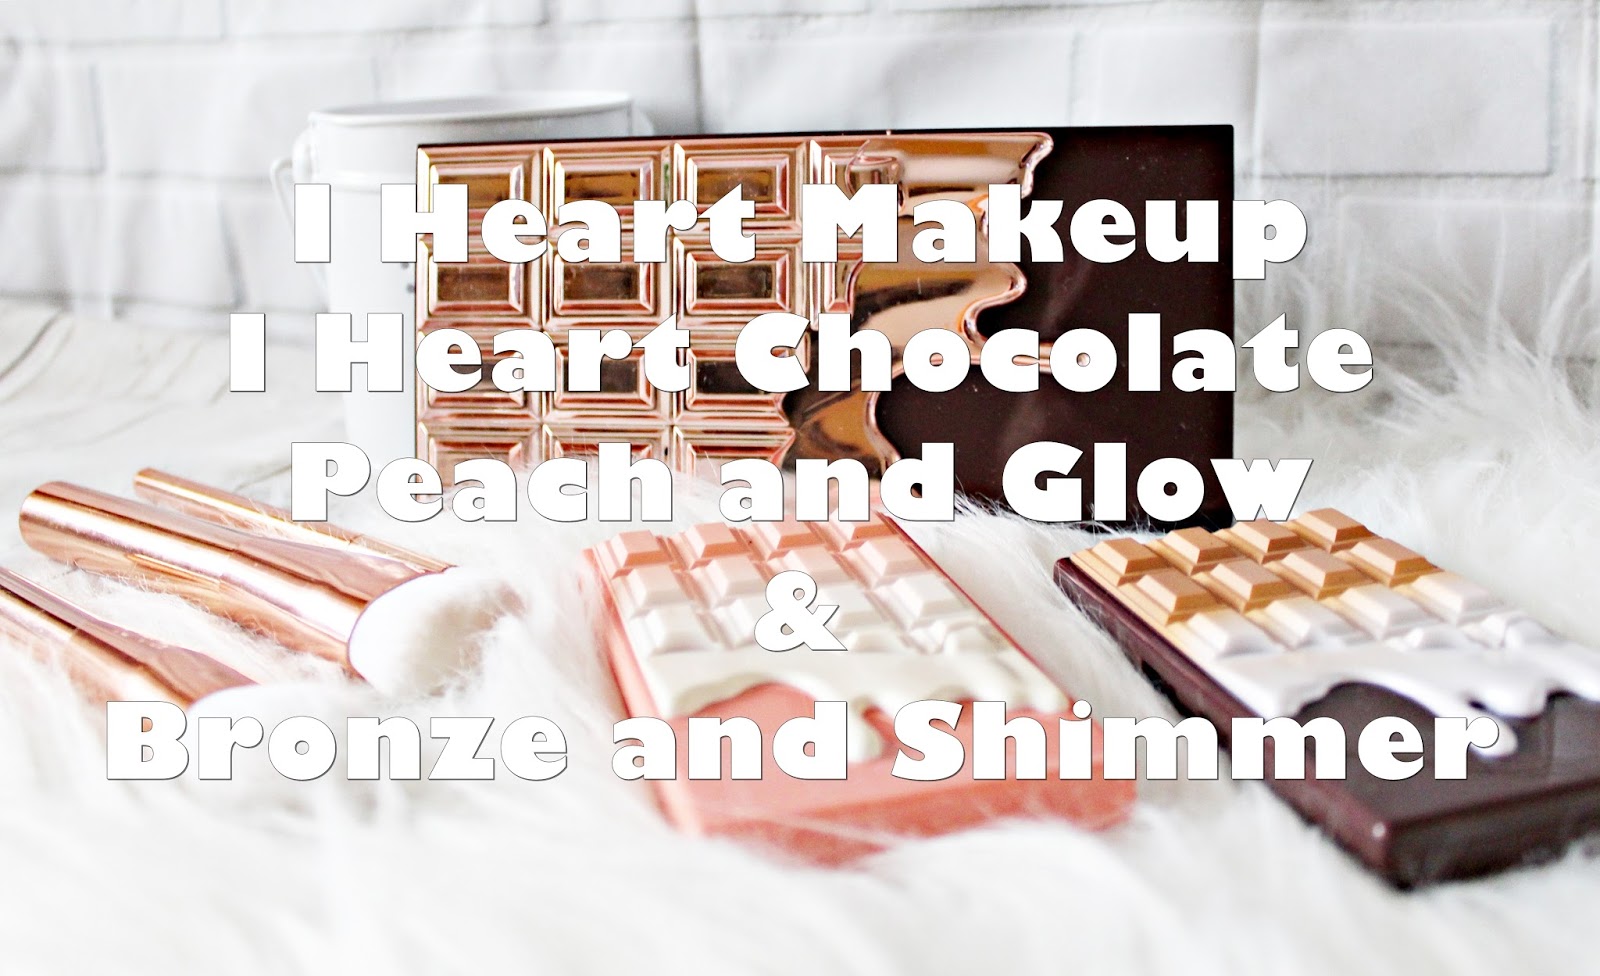 I ♥ Makeup I ♥ Chocolate Rose Gold, Peach and glow, Bronze and Shimmer